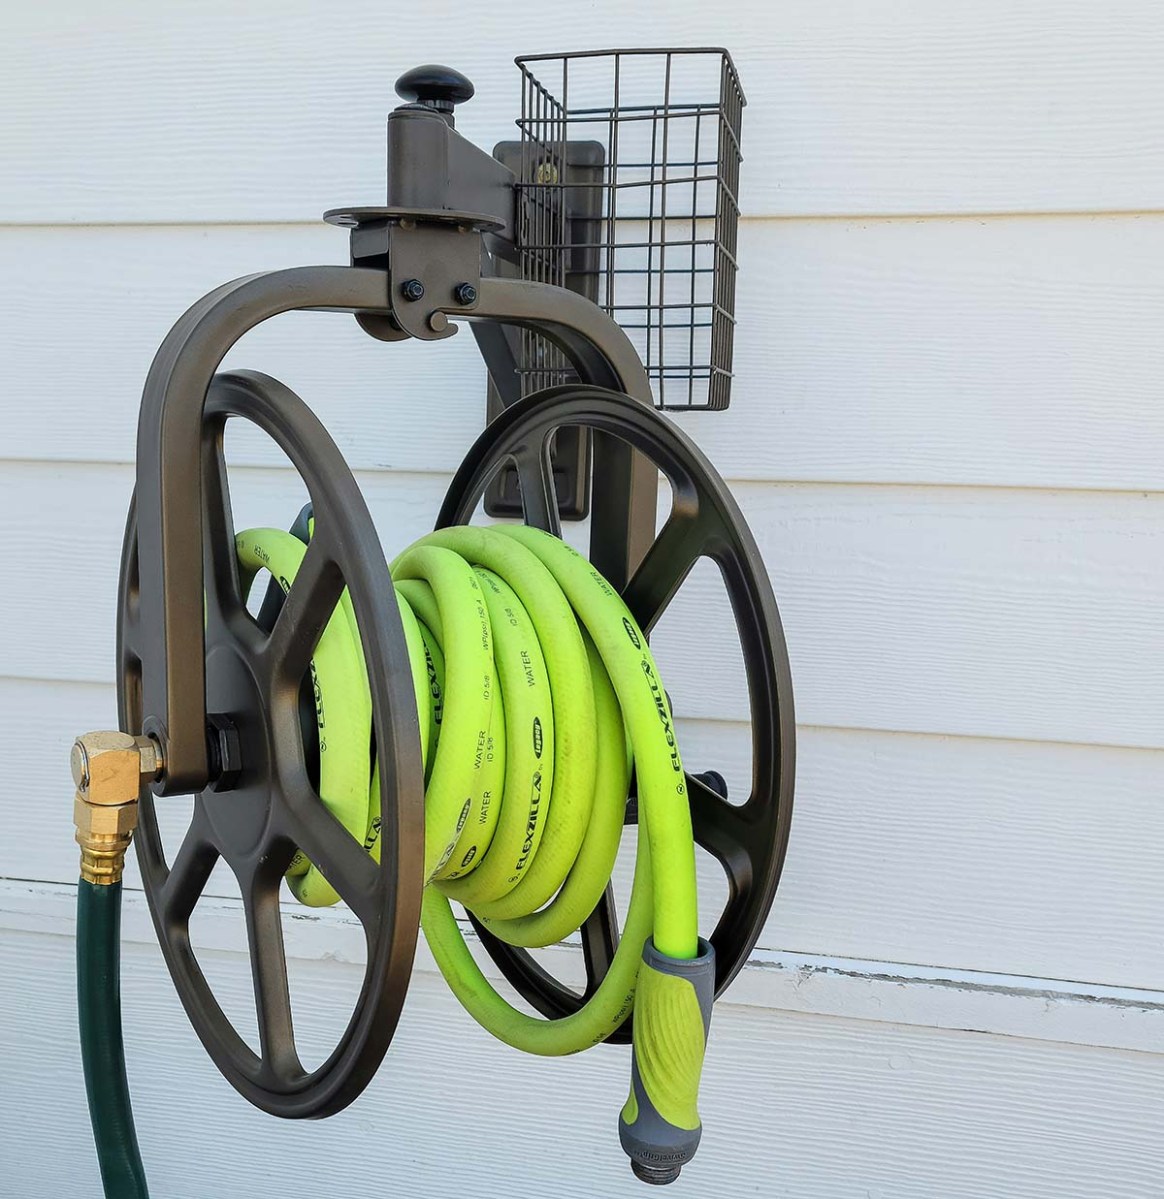 Hose reel for 100 meters of hose with 1 inch diameter